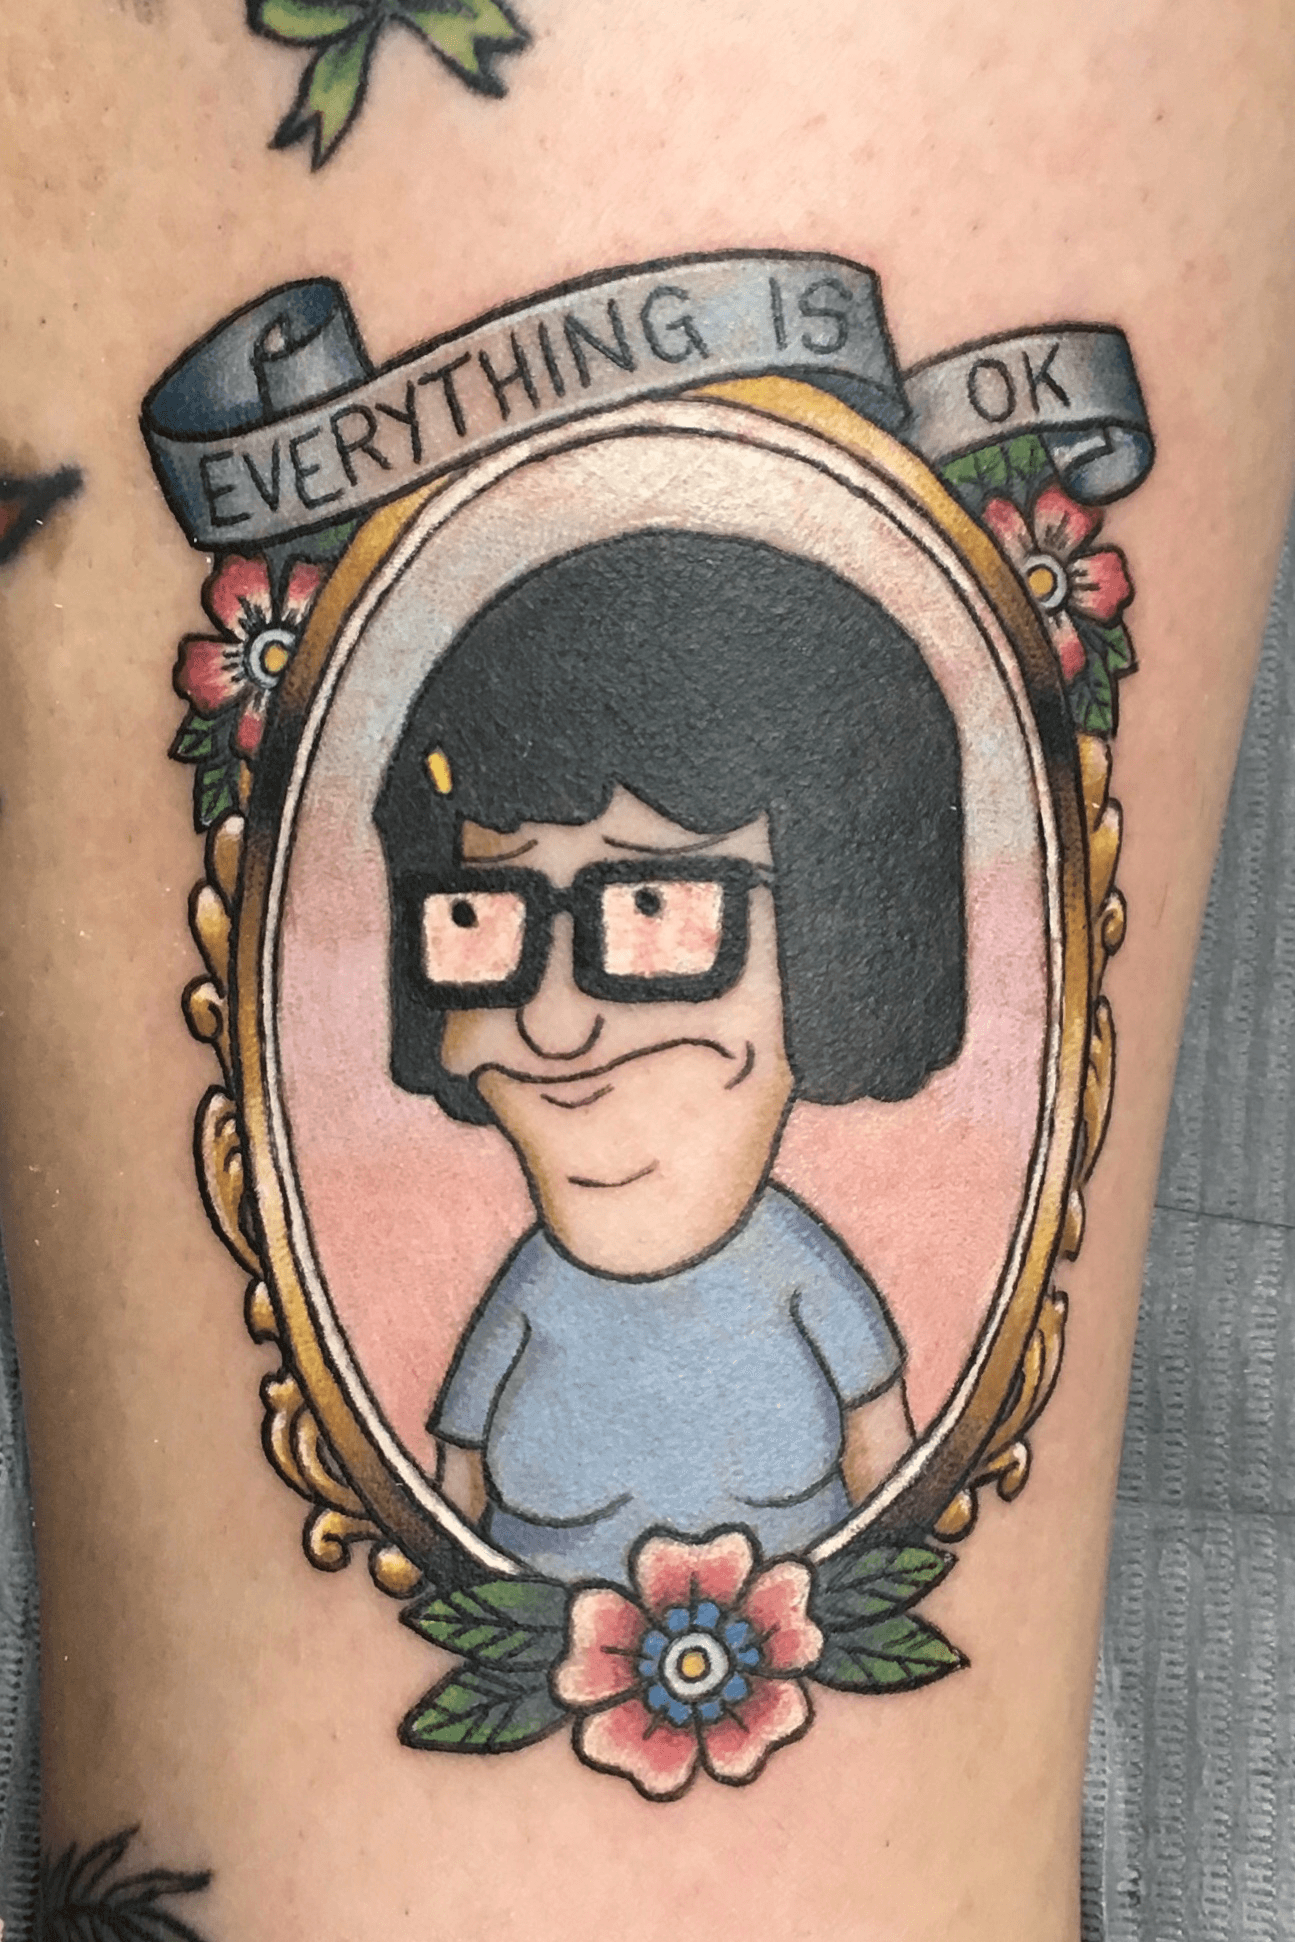 New Hope Tattoo  Bobs burger pieces done recently by coshtattoos  For  enquiries please message Clara through her page directly coshtattoos   tattoo tattoos tattoodesign design drawing tattoostudio art  Facebook